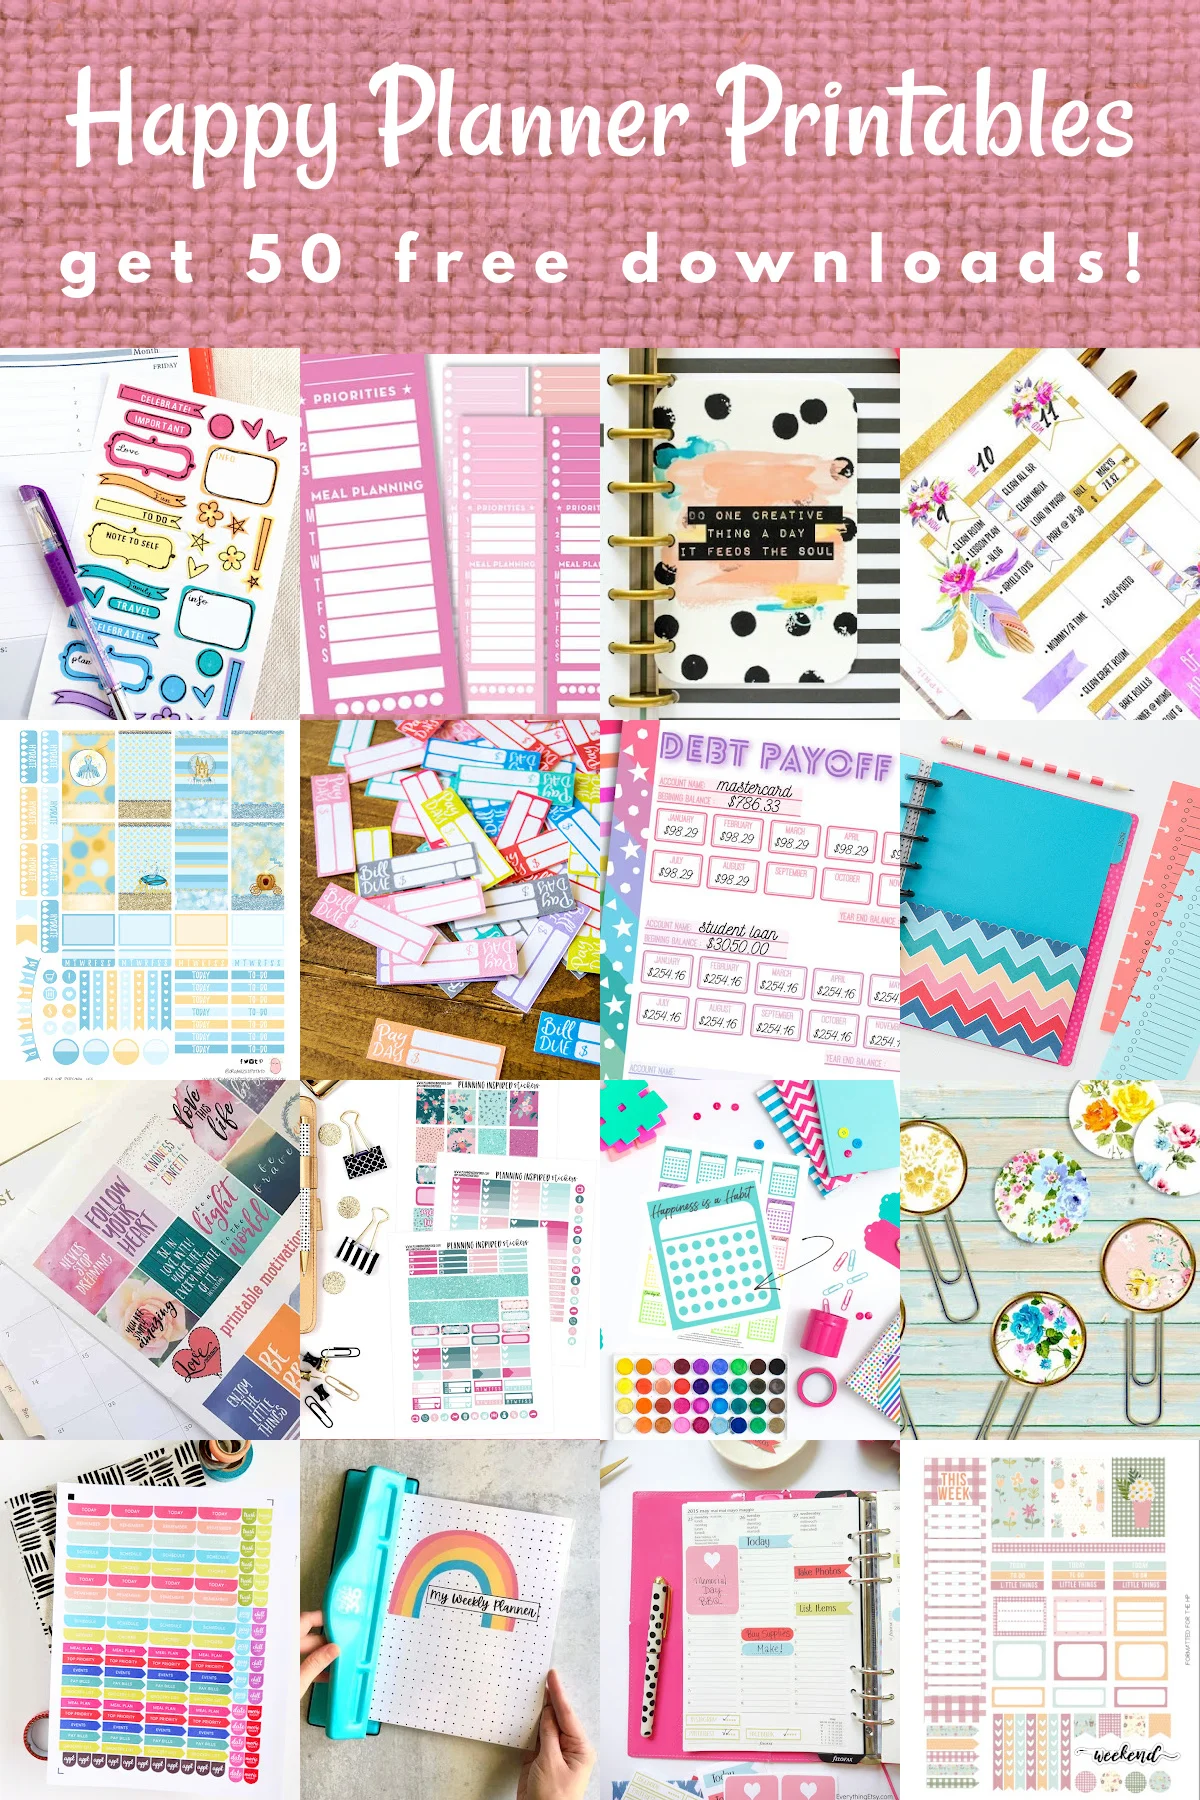 Customizable Color Yourself Value Pack Stickers for Planners and Scrapbooks